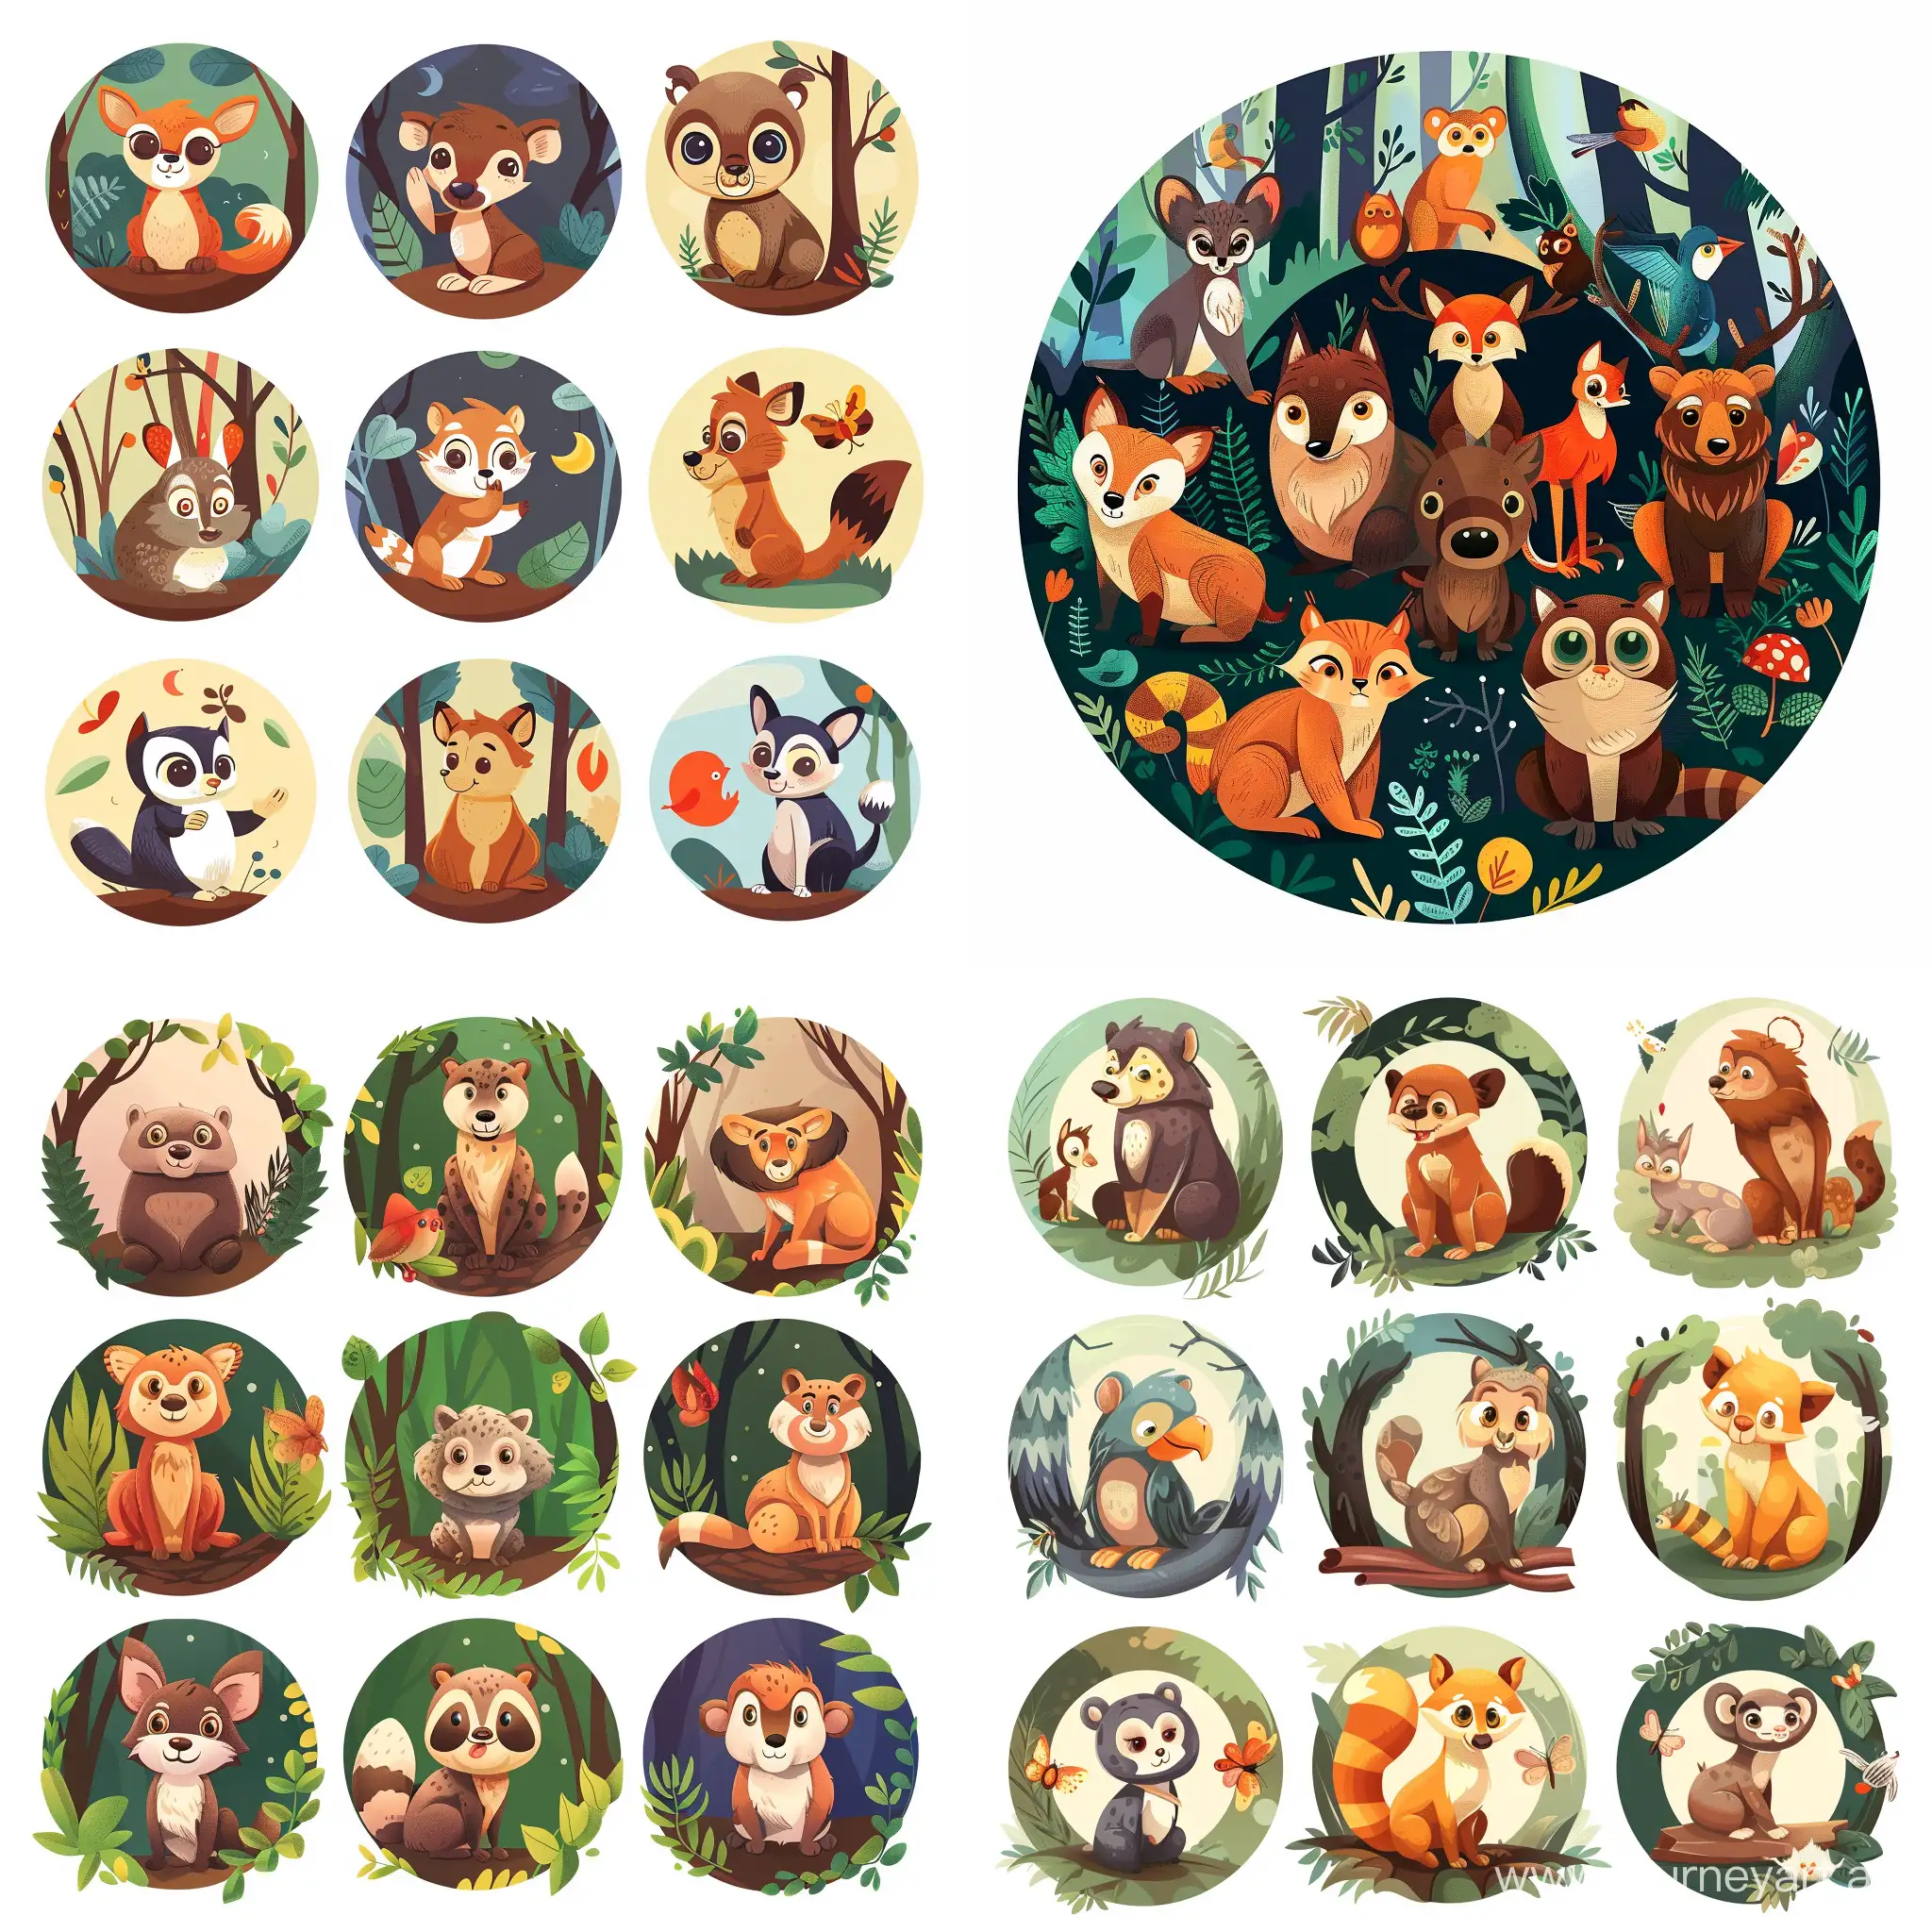 Colorful-Cartoon-Forest-Animals-in-Circular-Style-Illustration